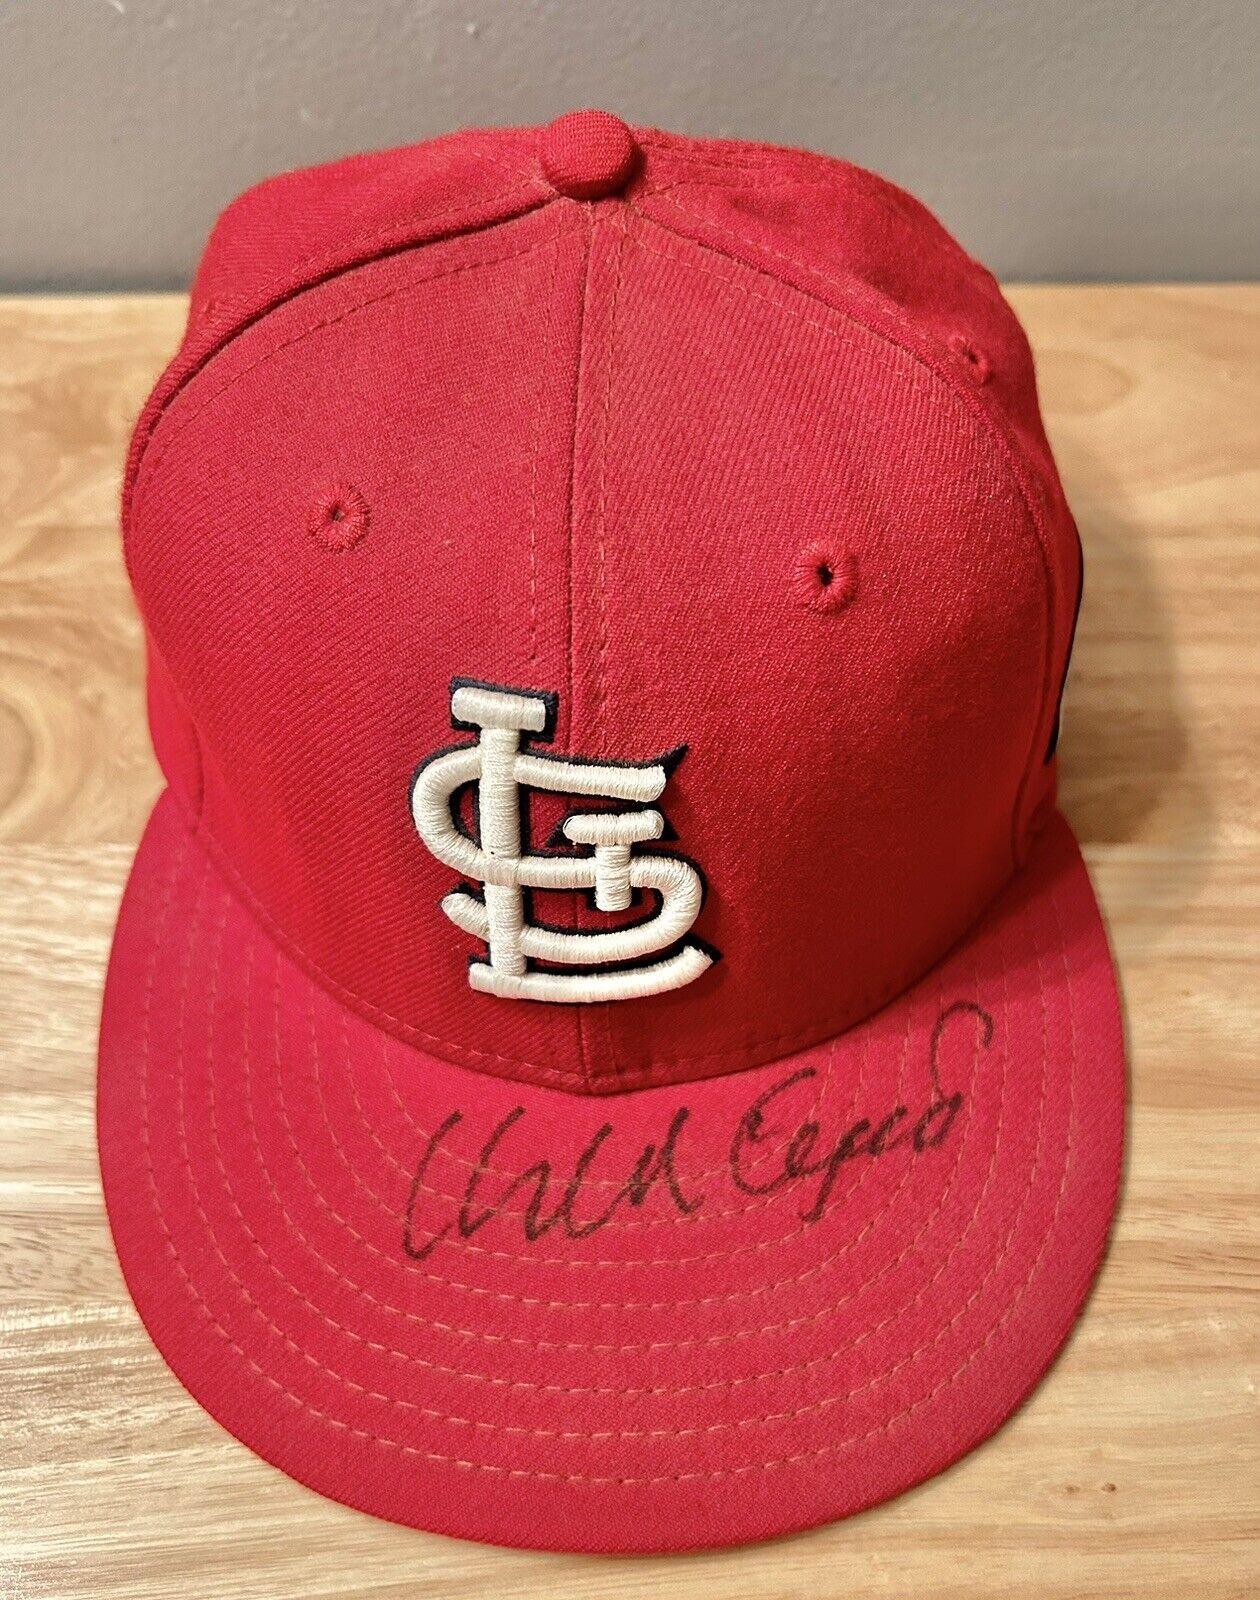 Orlando Cepeda St Louis Cardinals Signed Autographed New Era Hat